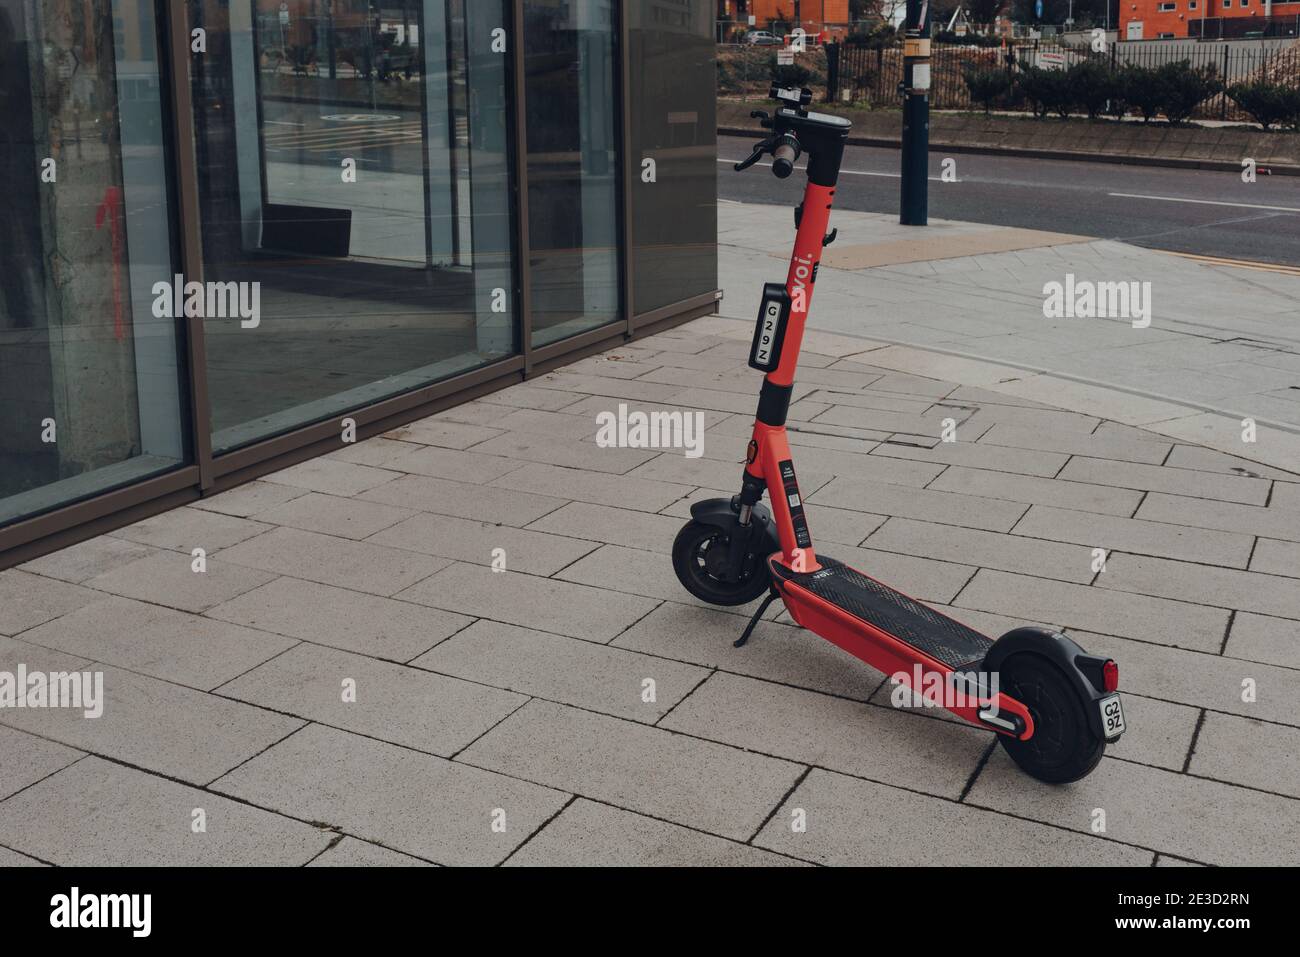 Birmingham, UK - January 17, 2021: VOI rental electric scooter on a street in Birmingham, UK. The e-scooters are available in Birmingham and Coventry Stock Photo